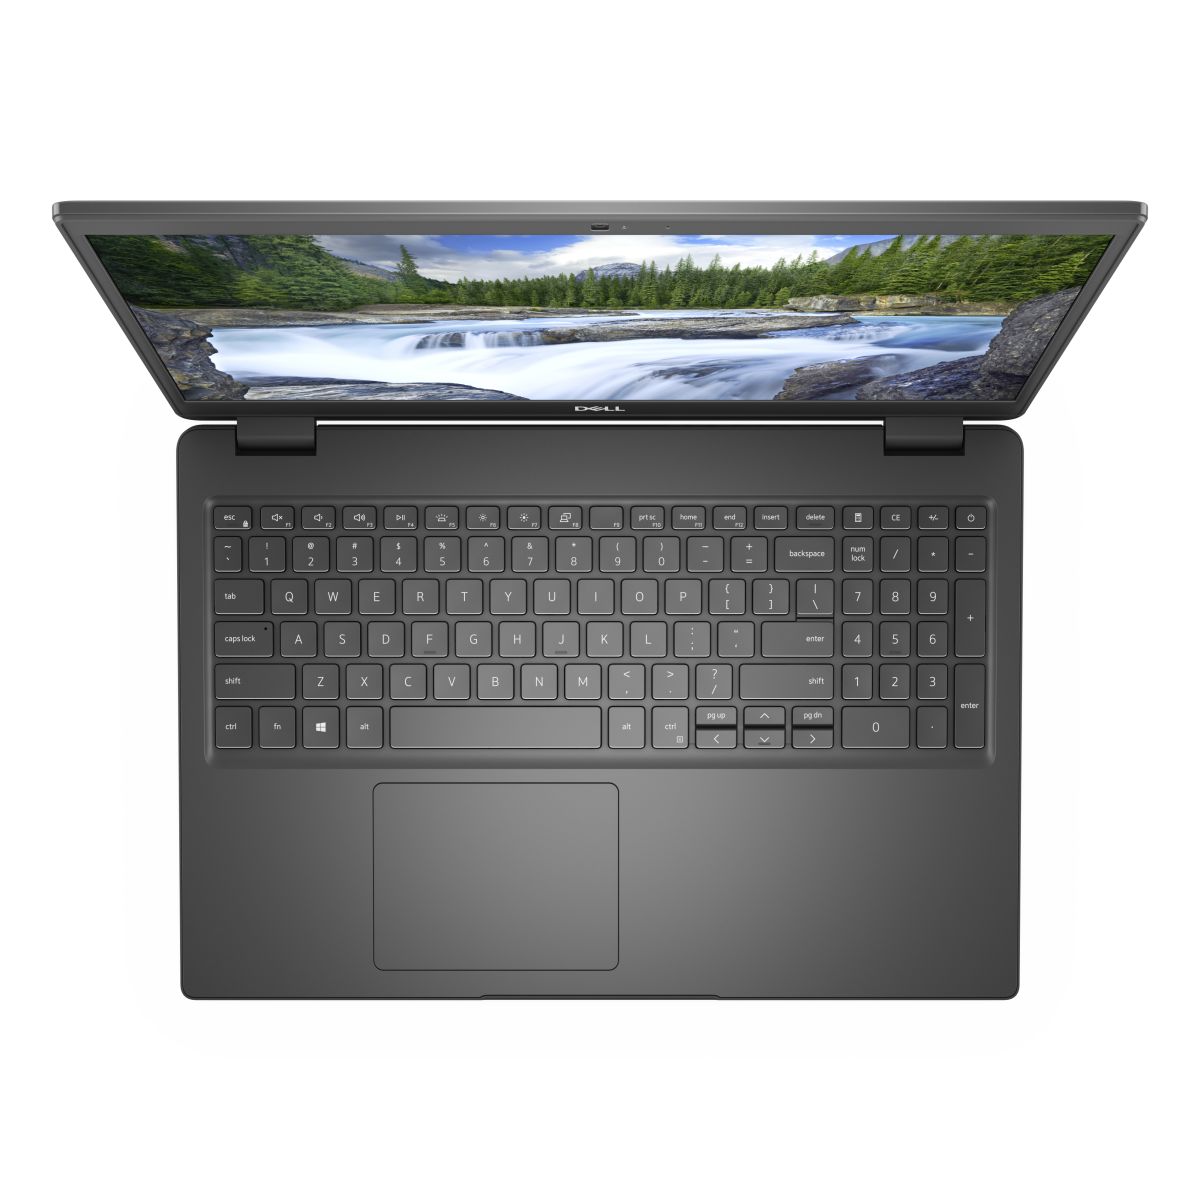 DELL Latitude 3510 - N2W0J laptop specifications